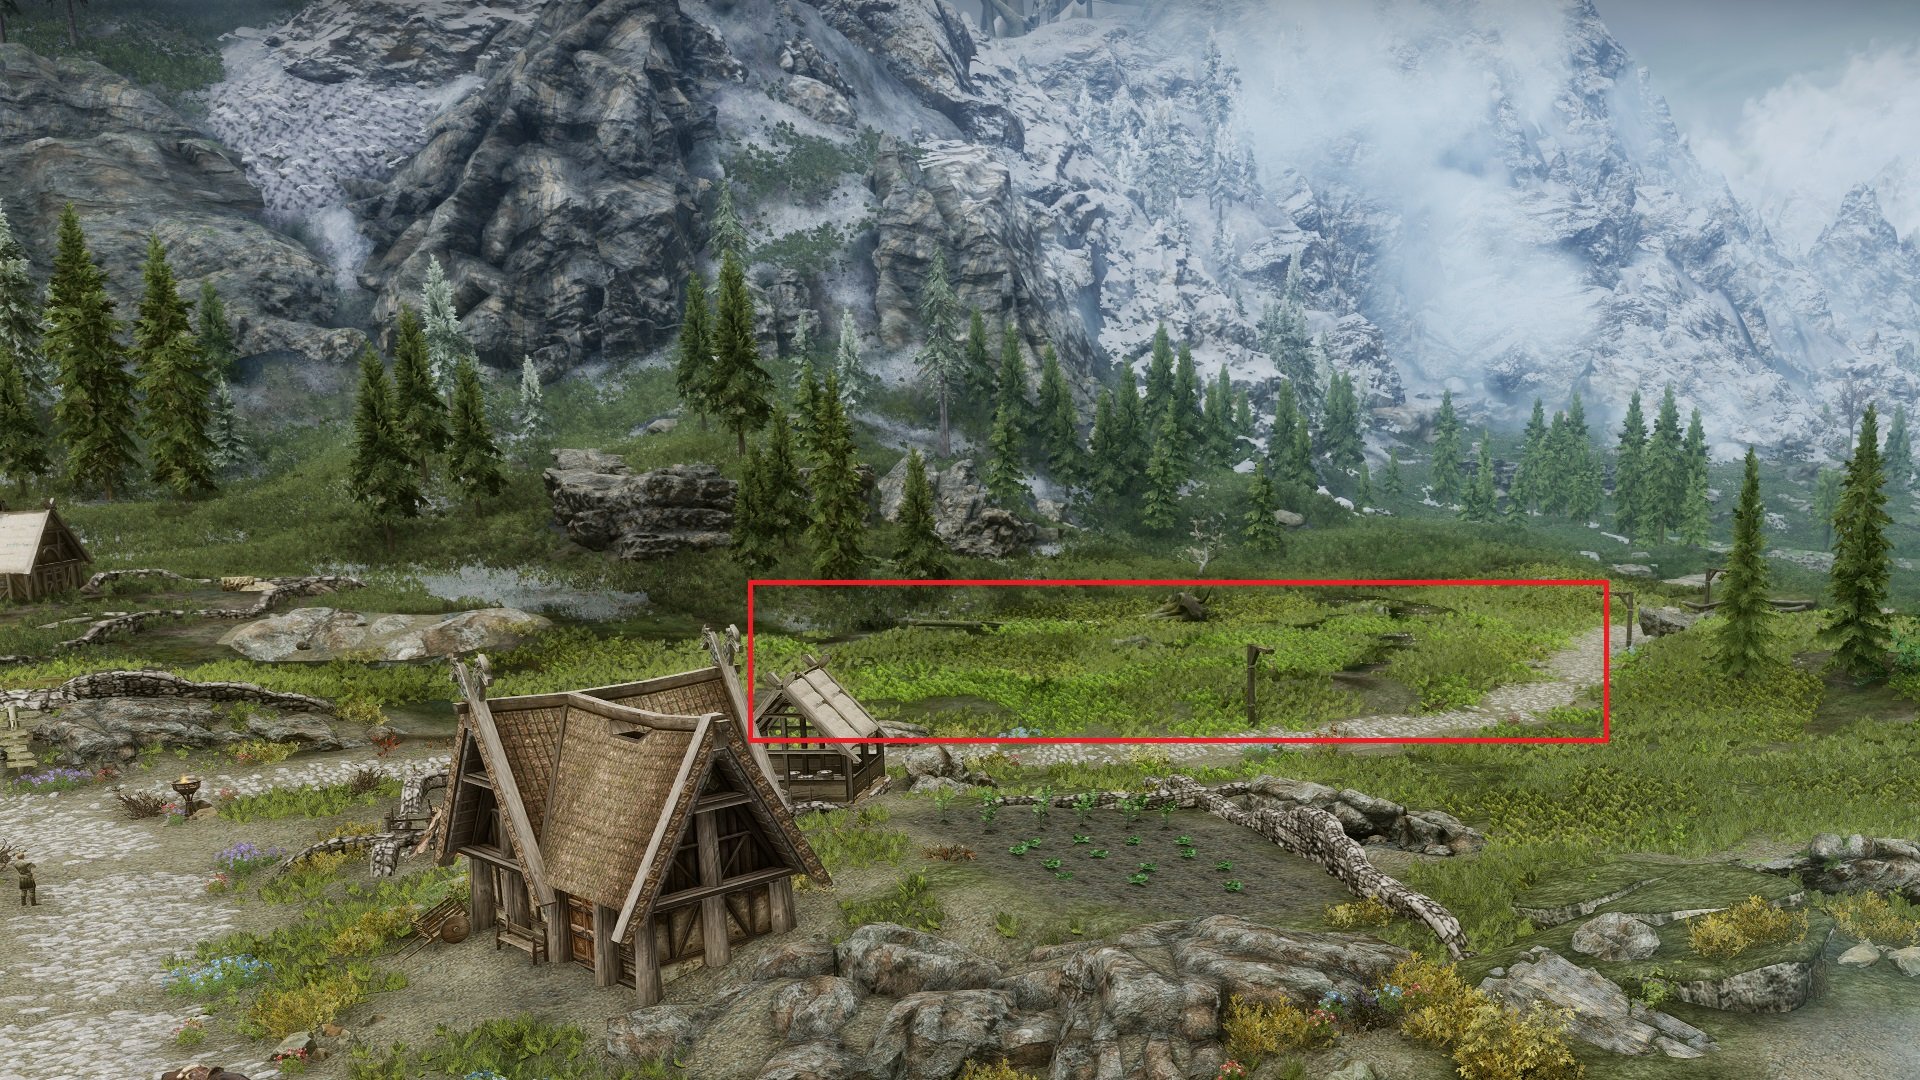 Anyone know of any LOD Mods? Draw and View Distance are maxed out